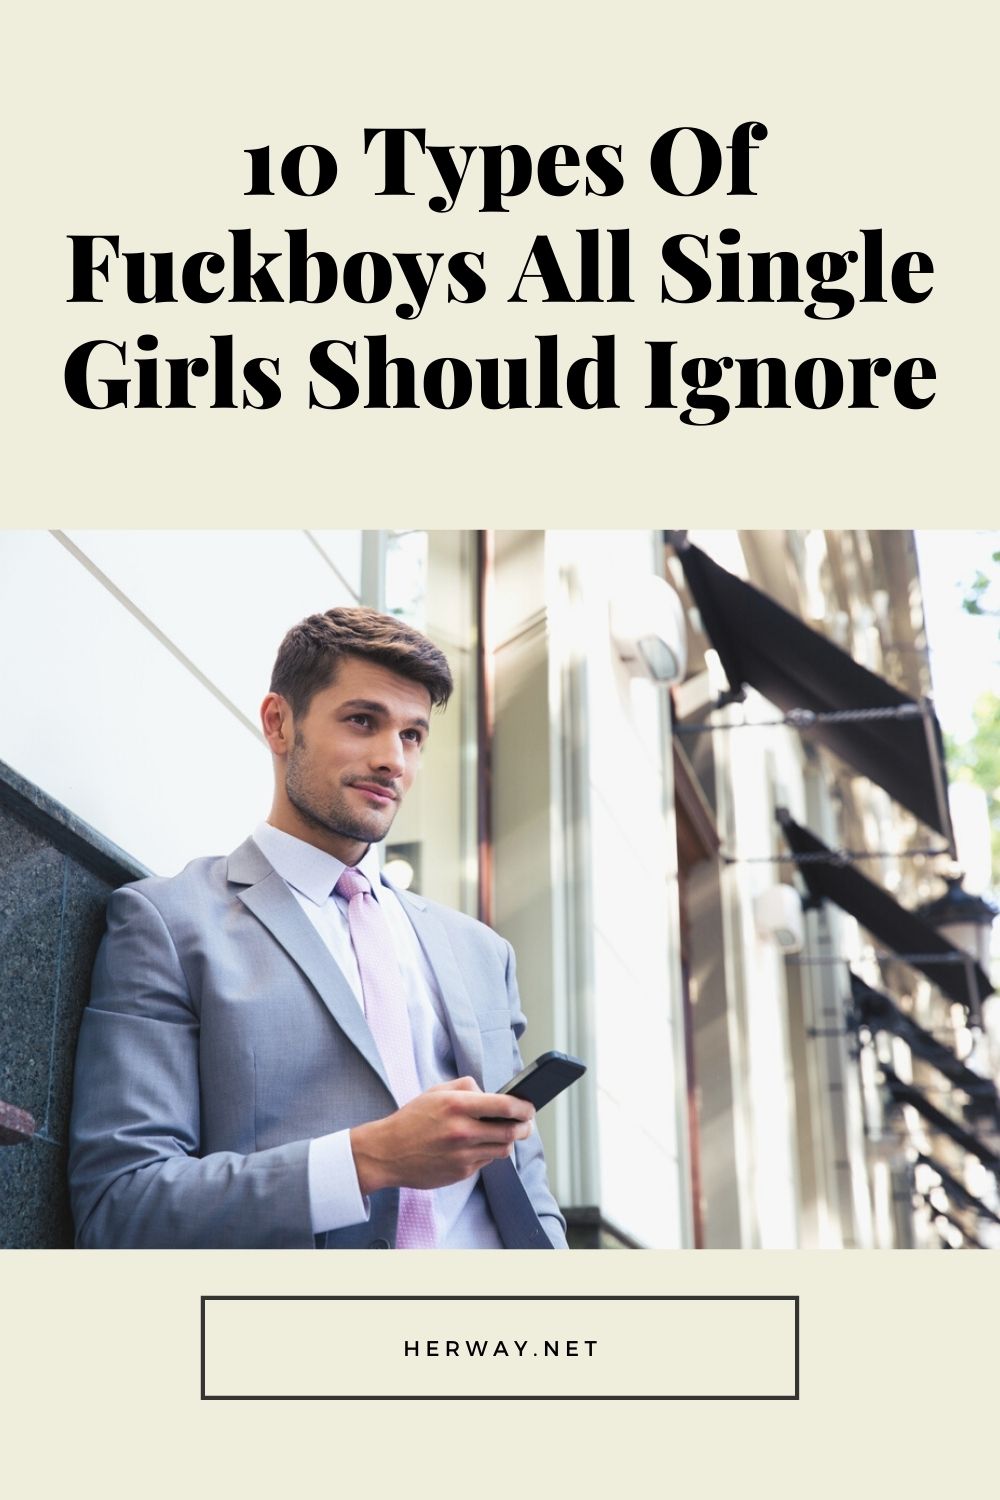 10 Types Of Fuckboys All Single Girls Should Ignore